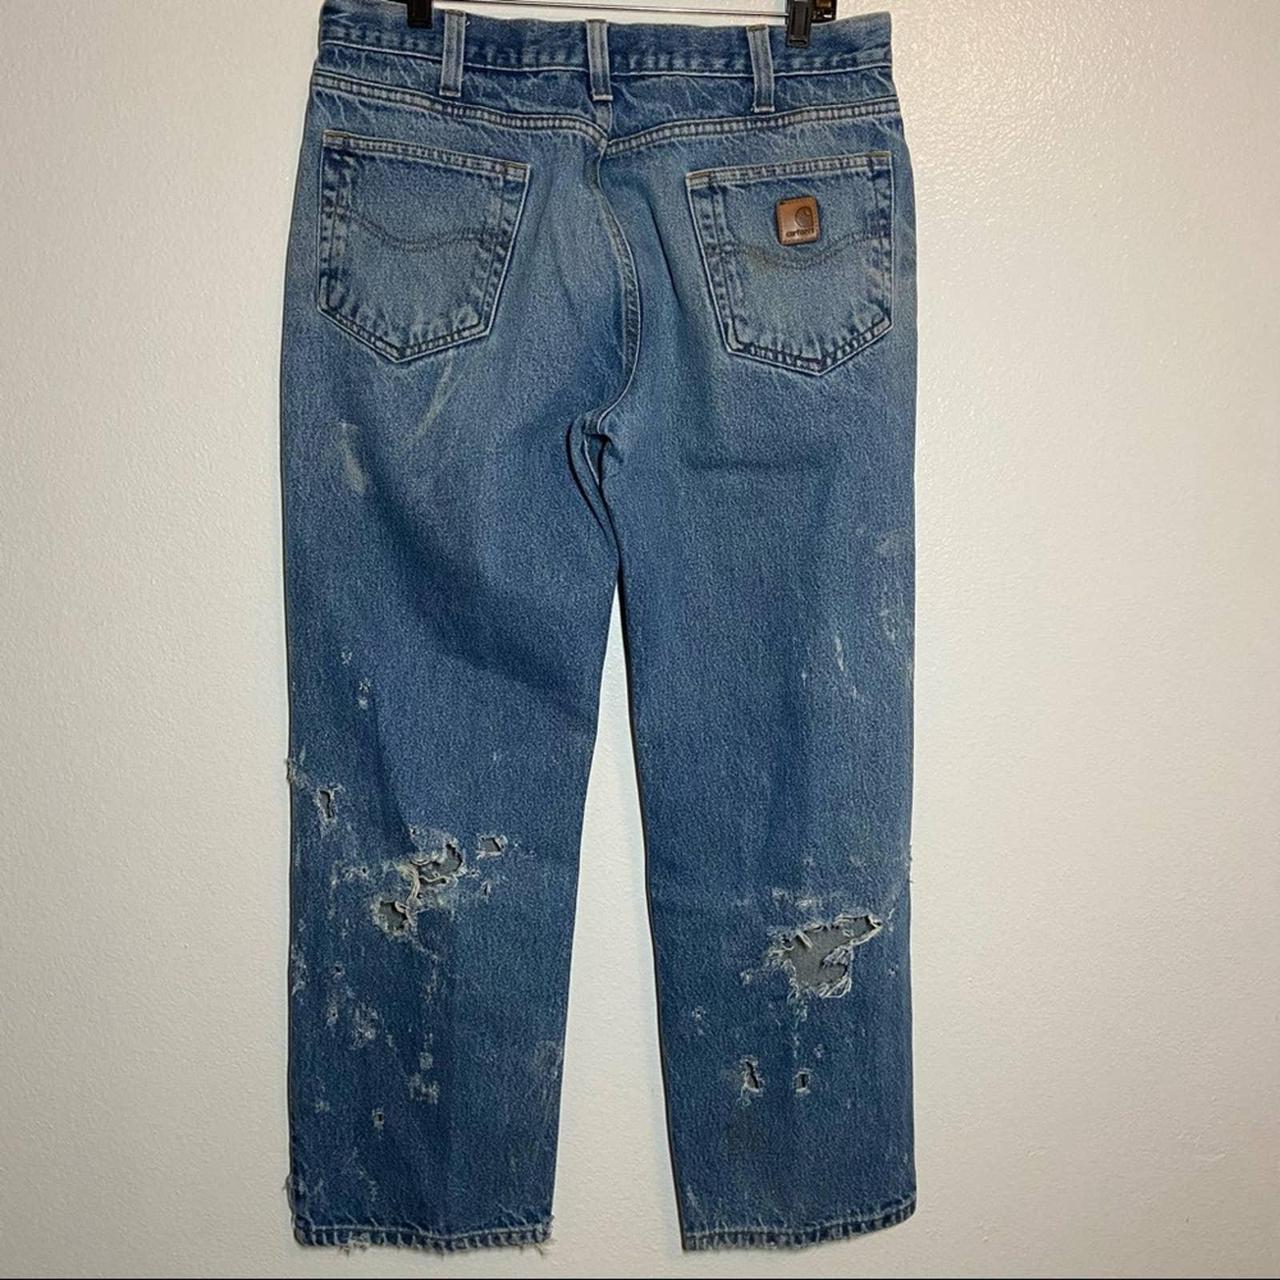 Product Image 4 - Carhartt Trashed Jeans Relaxed Fit